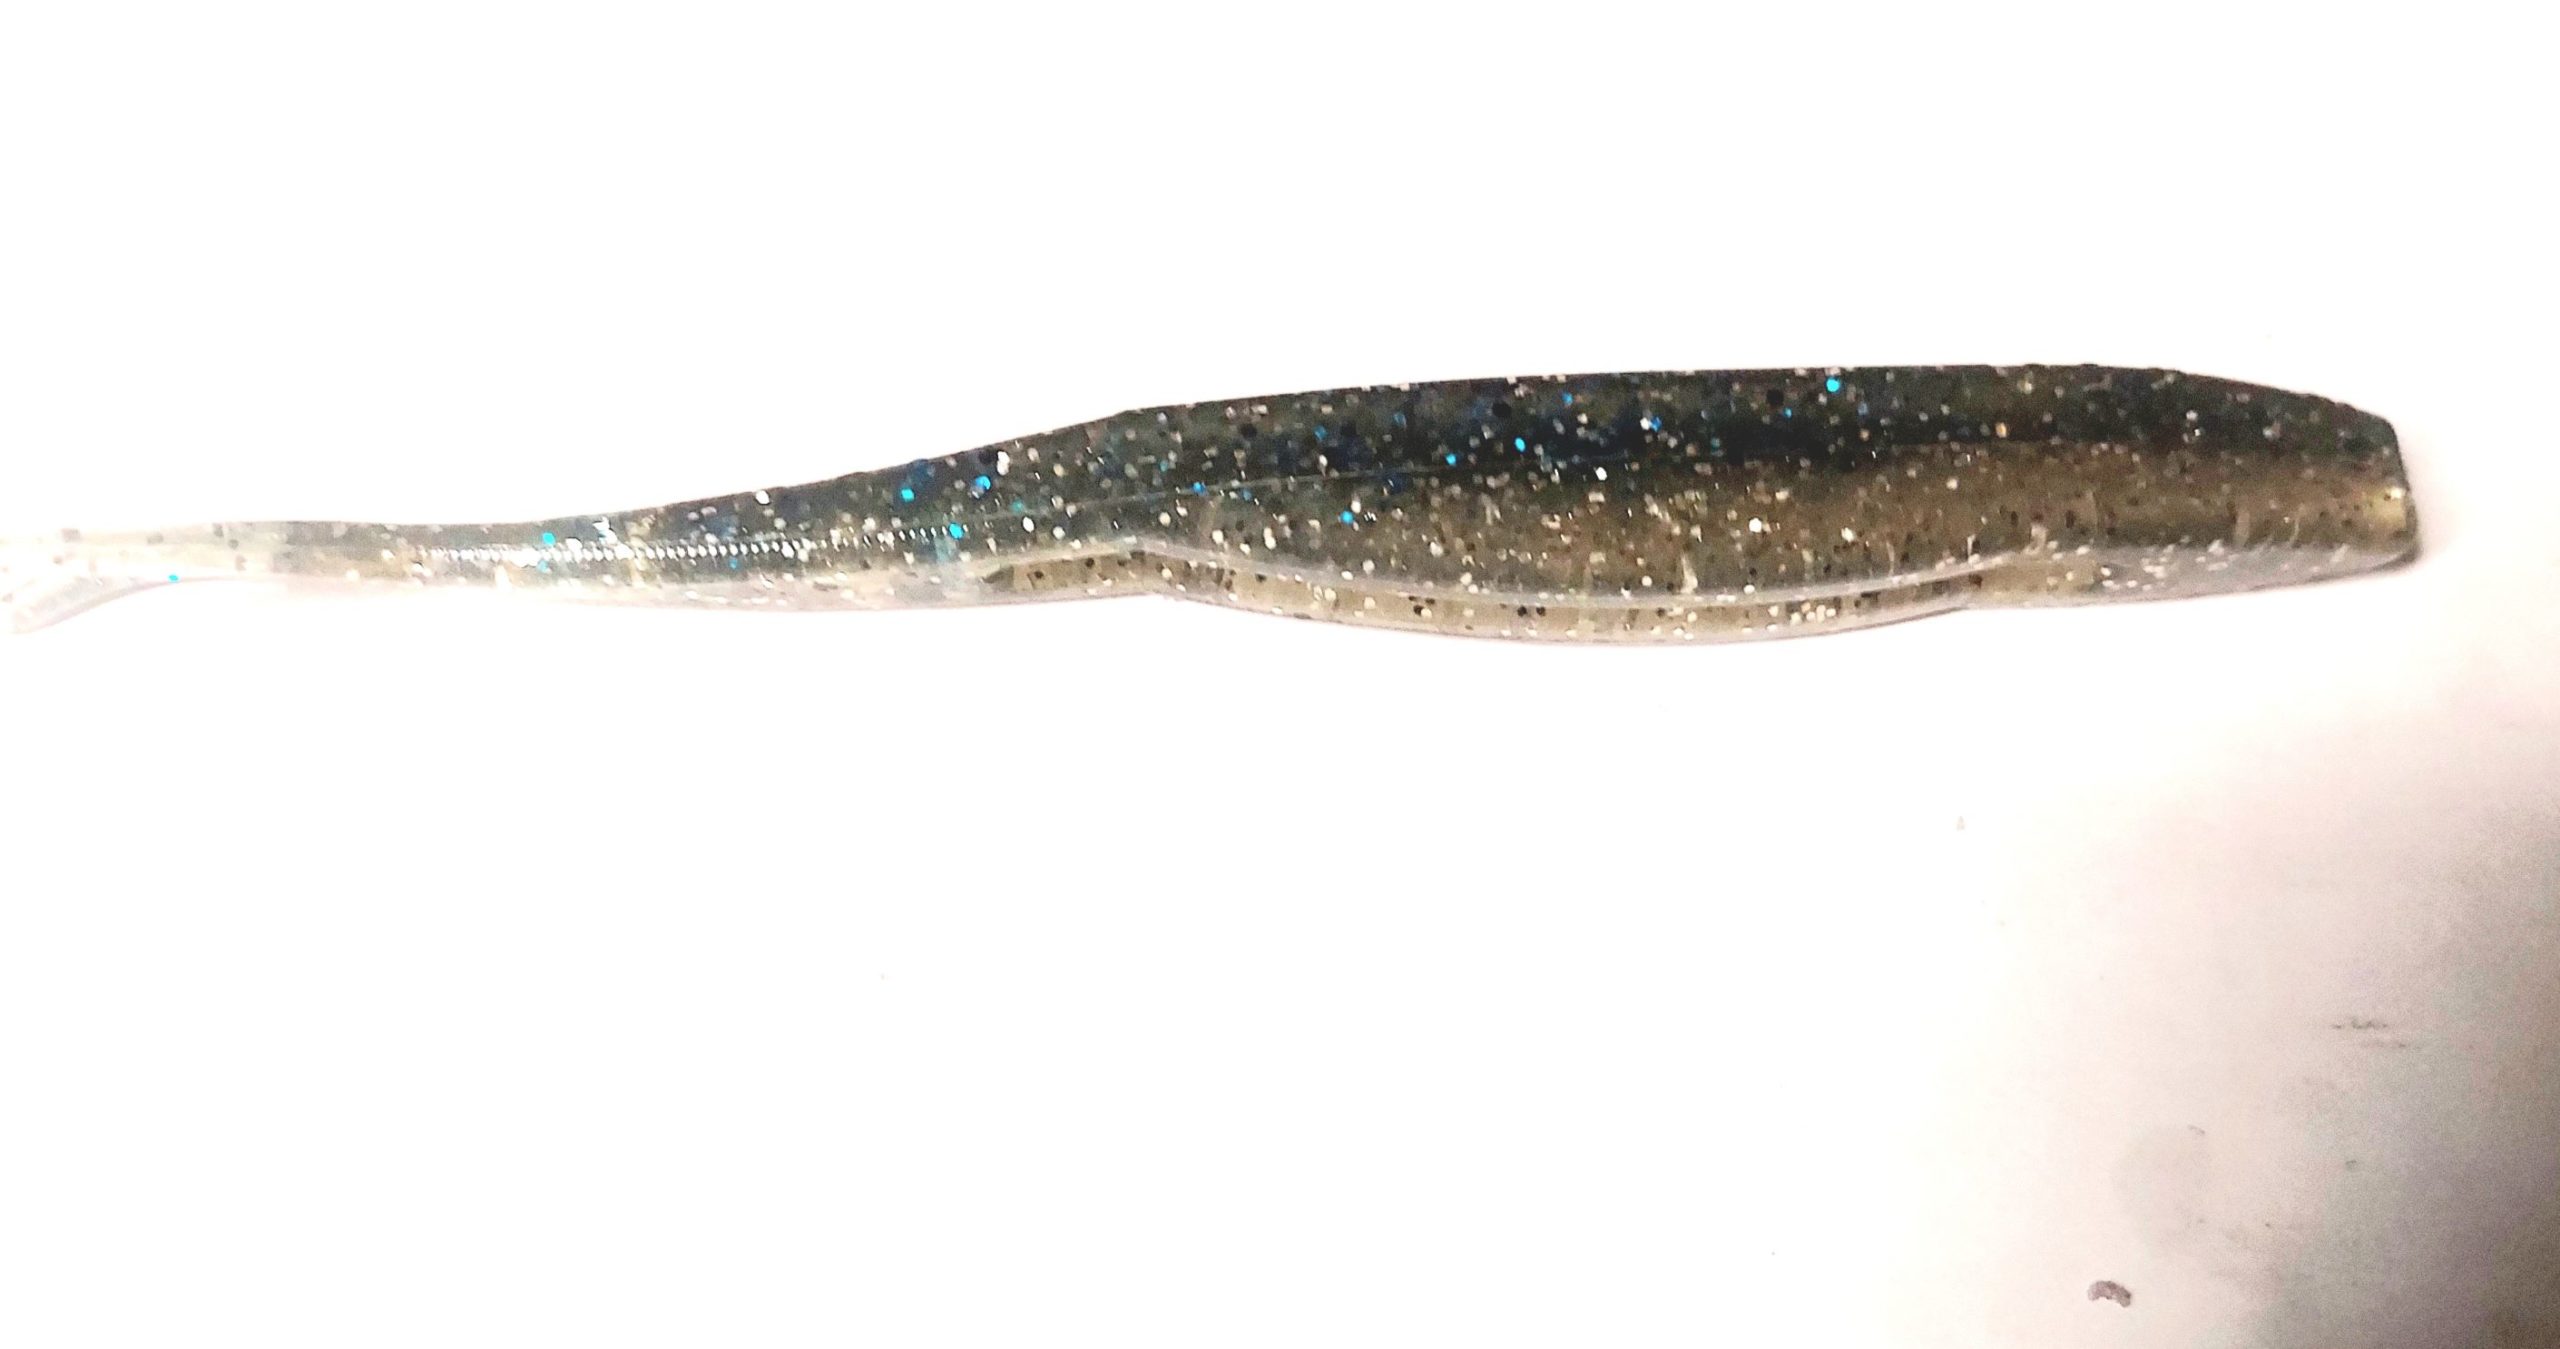 Jerk bait jointed bait soft plastic 5 1/4 inch Limited Edition color we  call spawner - Get Hooked Magic Baits